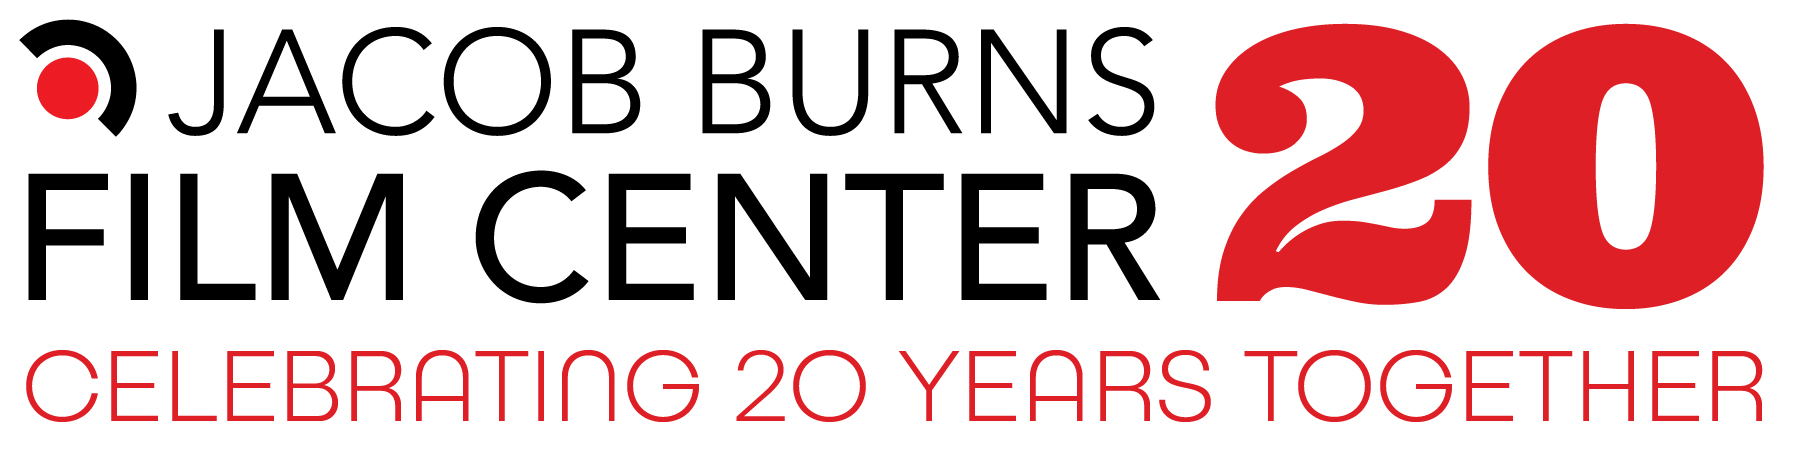 Jacob Burns Film Center Welcomes Two New Board Members